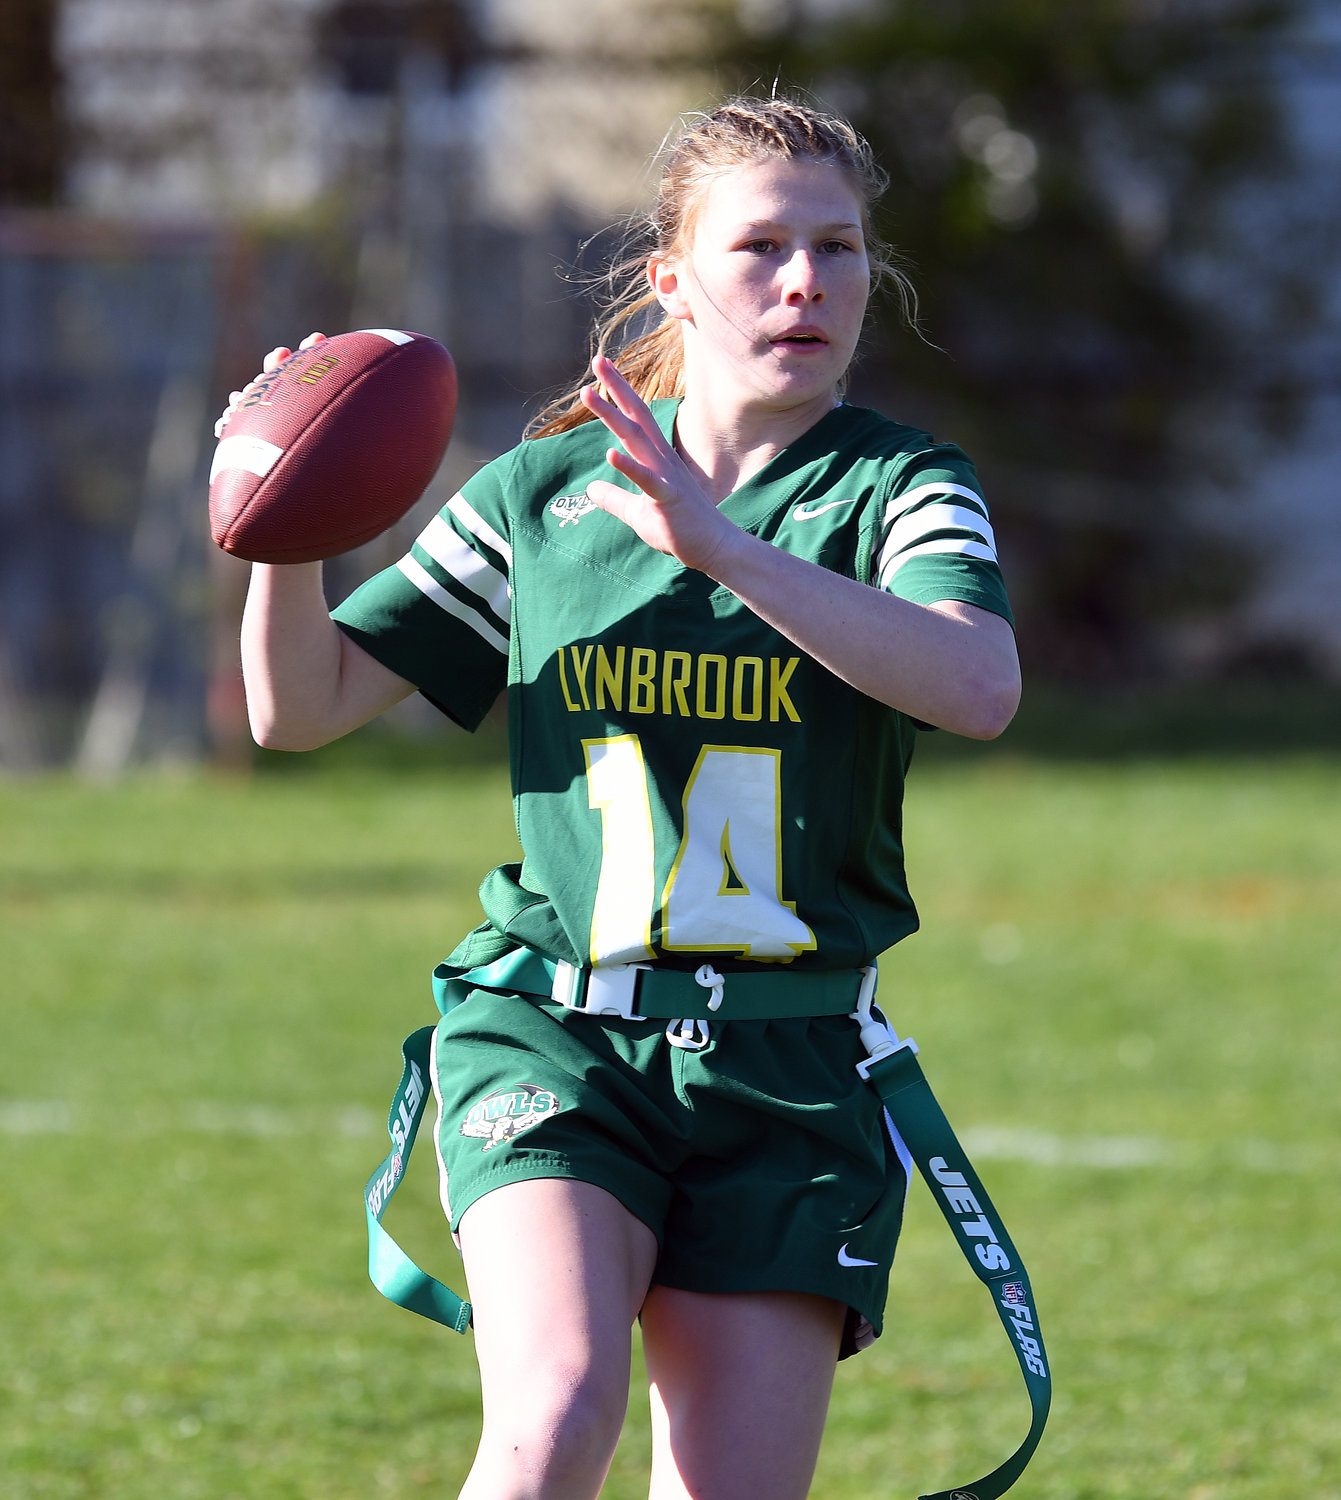 Lynbrook’s Kaelyn O’Brien had passing and rushing touchdowns in its win over Long Beach on April 28.